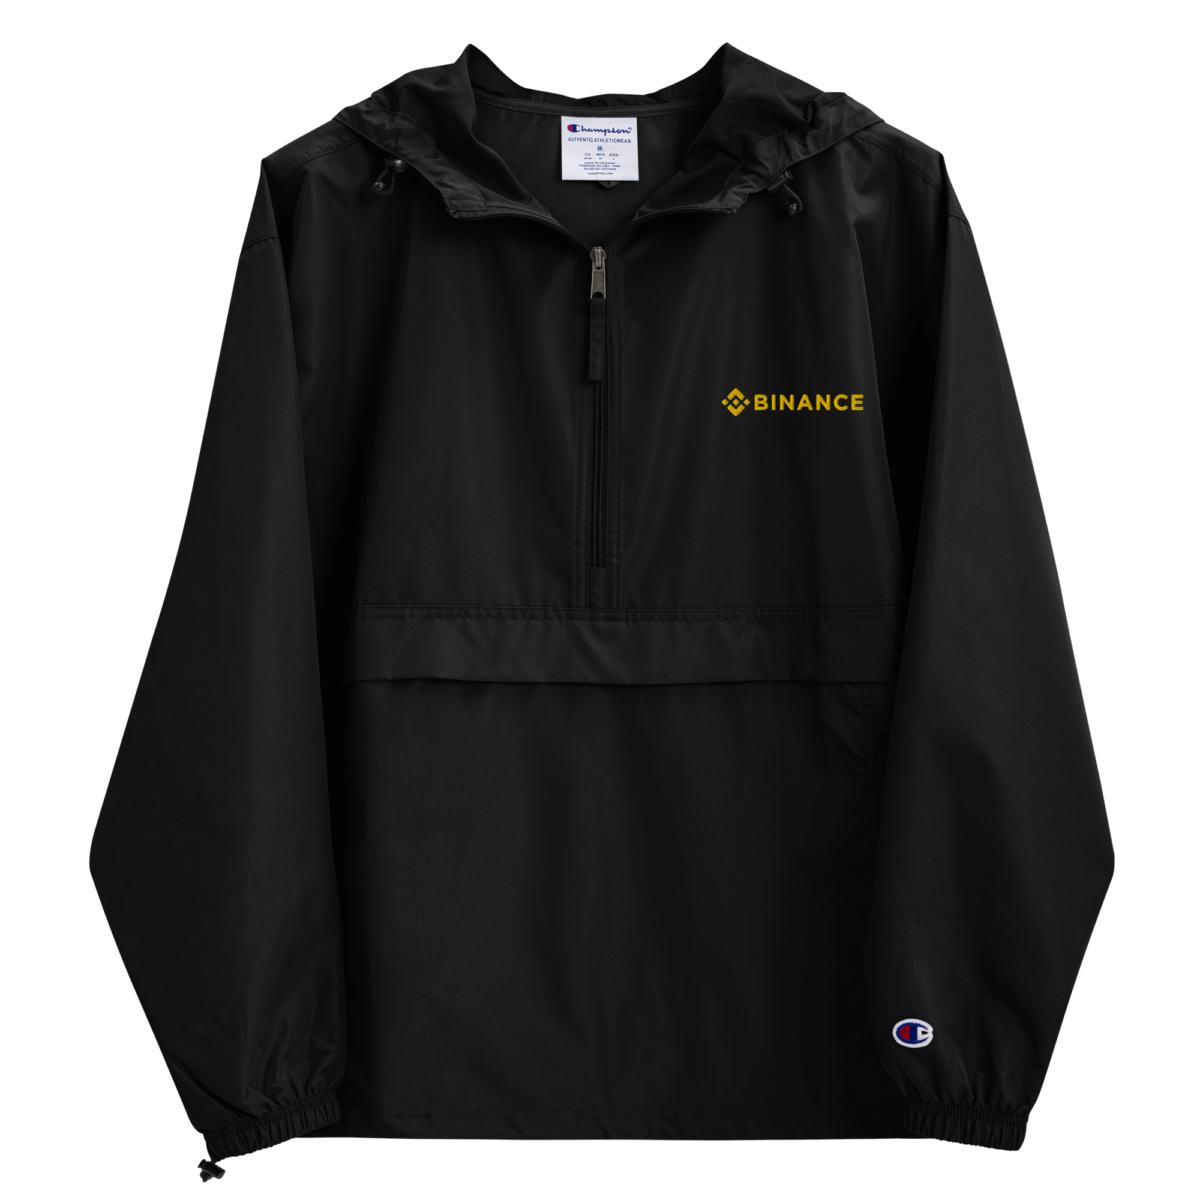 embroidered champion packable jacket black front 631f50ca5cab4 - Binance x Champion Packable Jacket